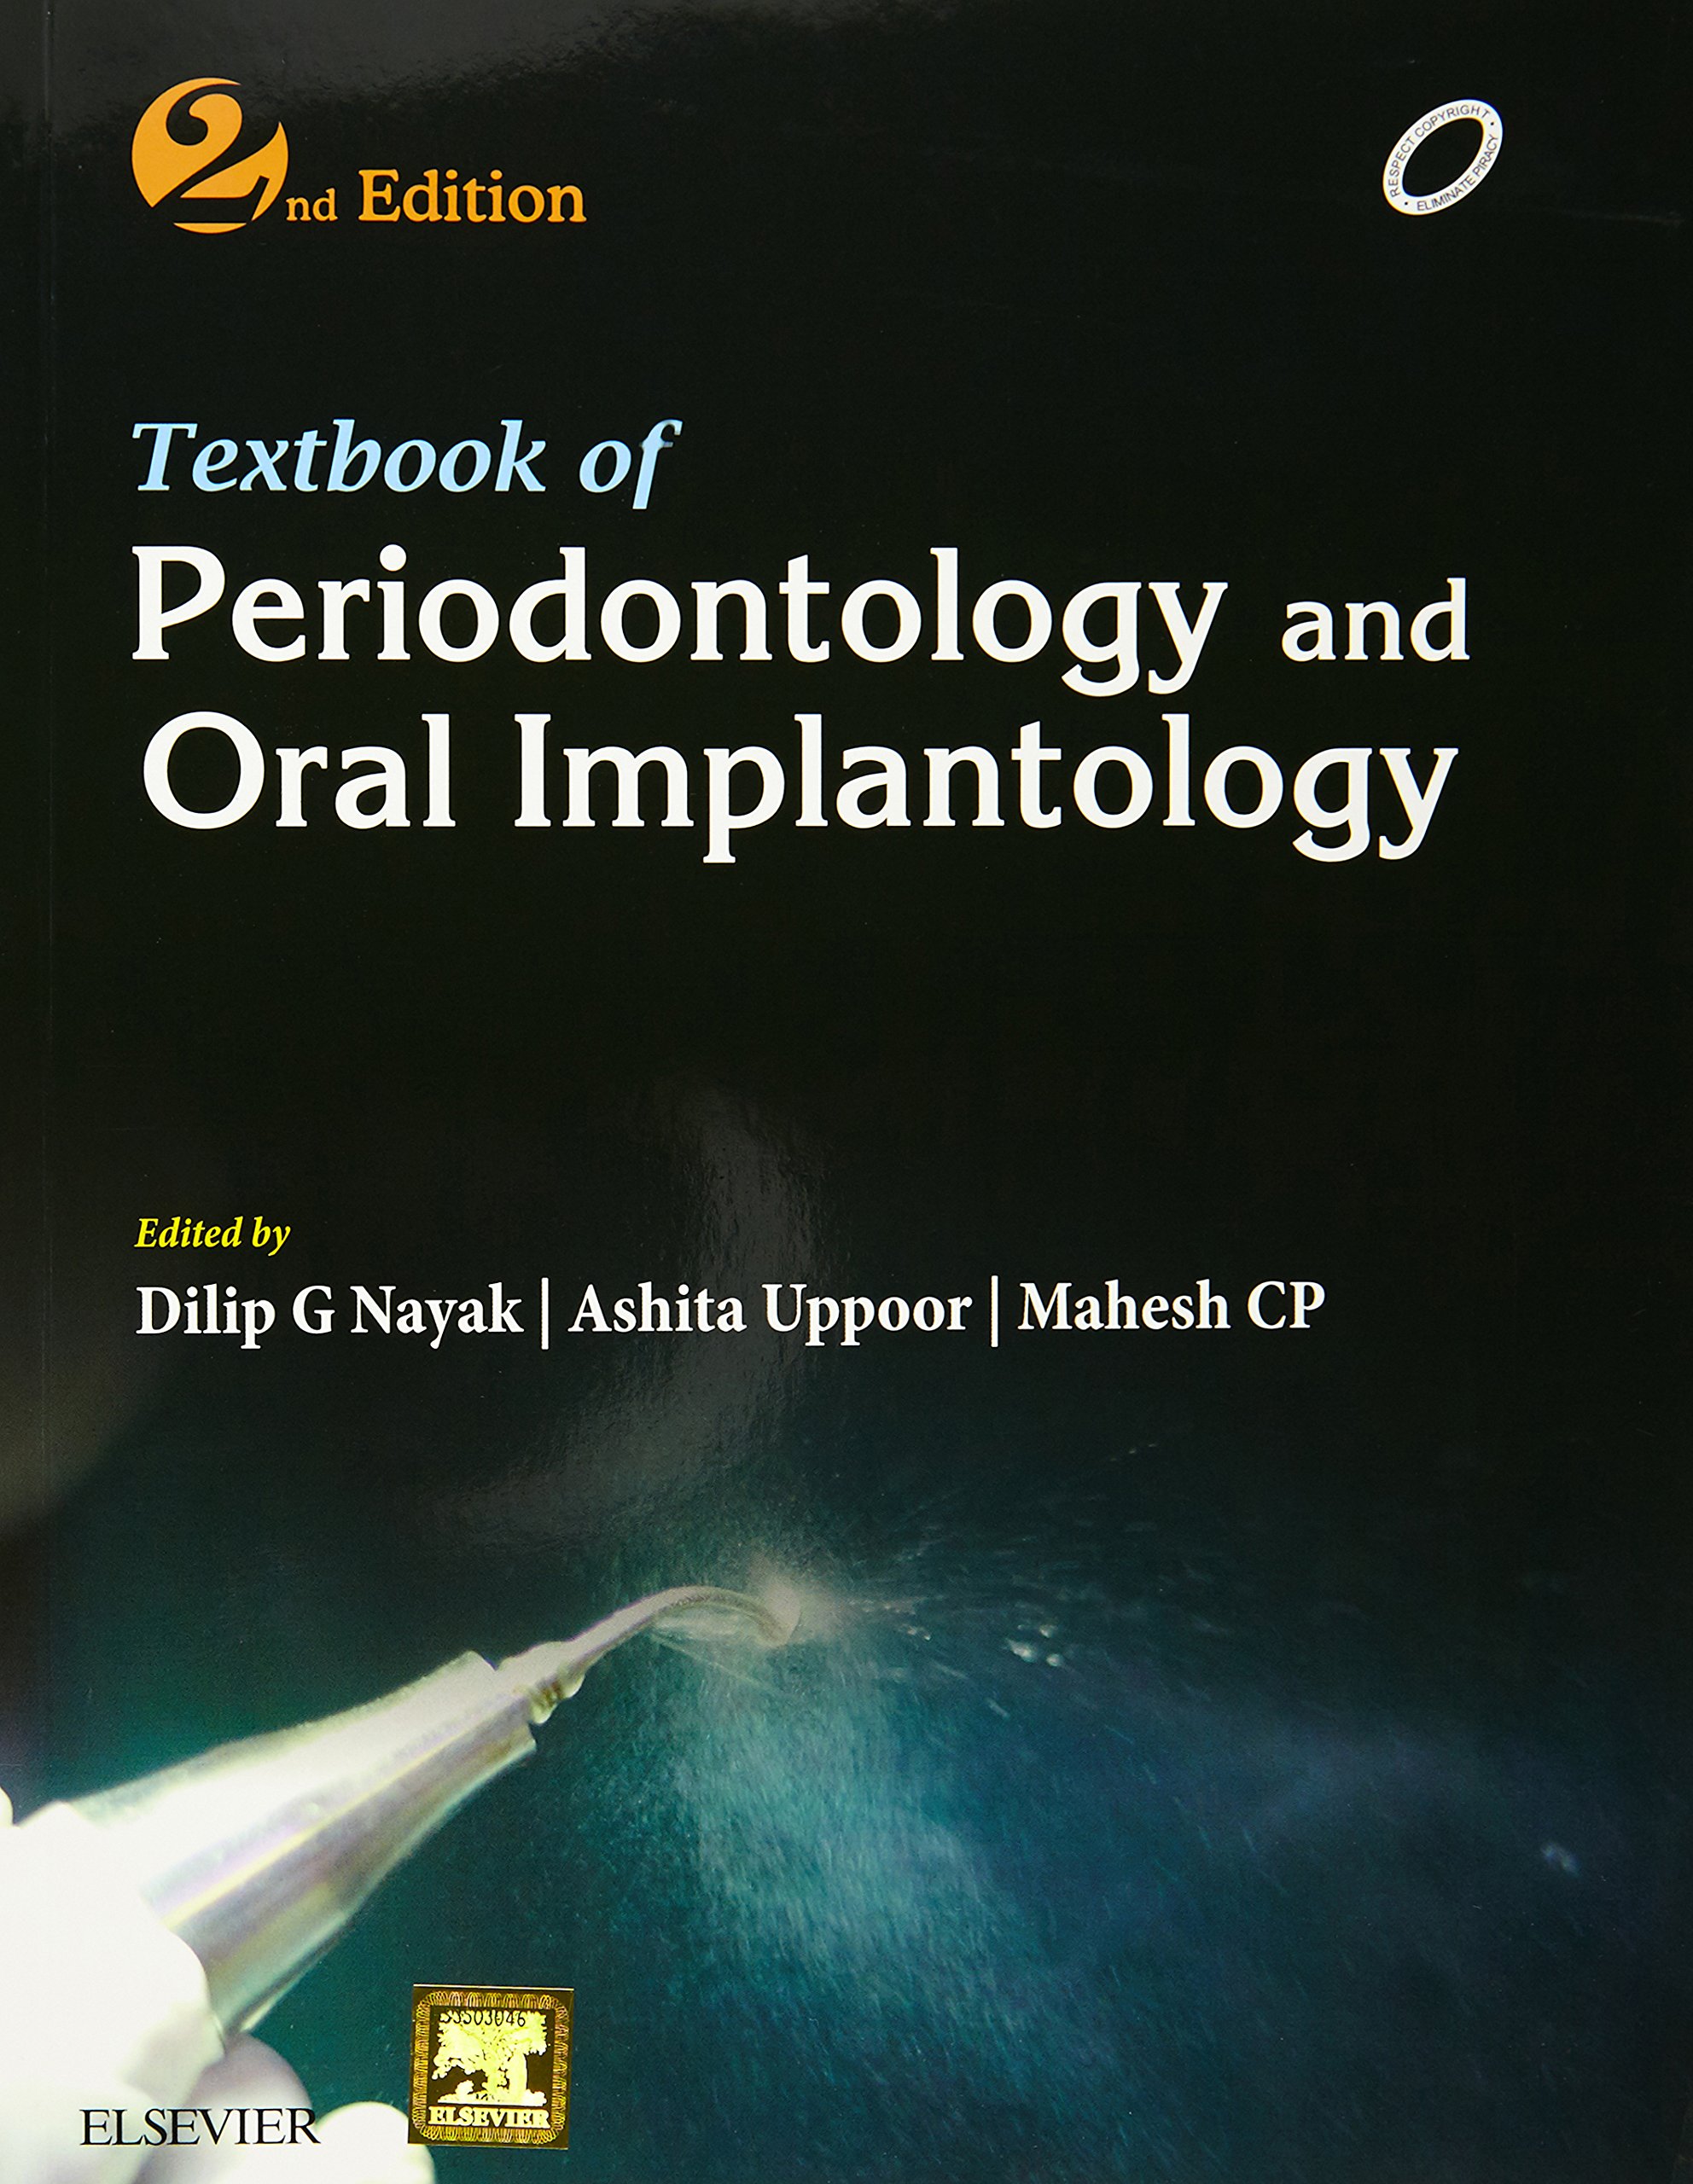 textbook-of-periodontology-and-oral-implantology-2e